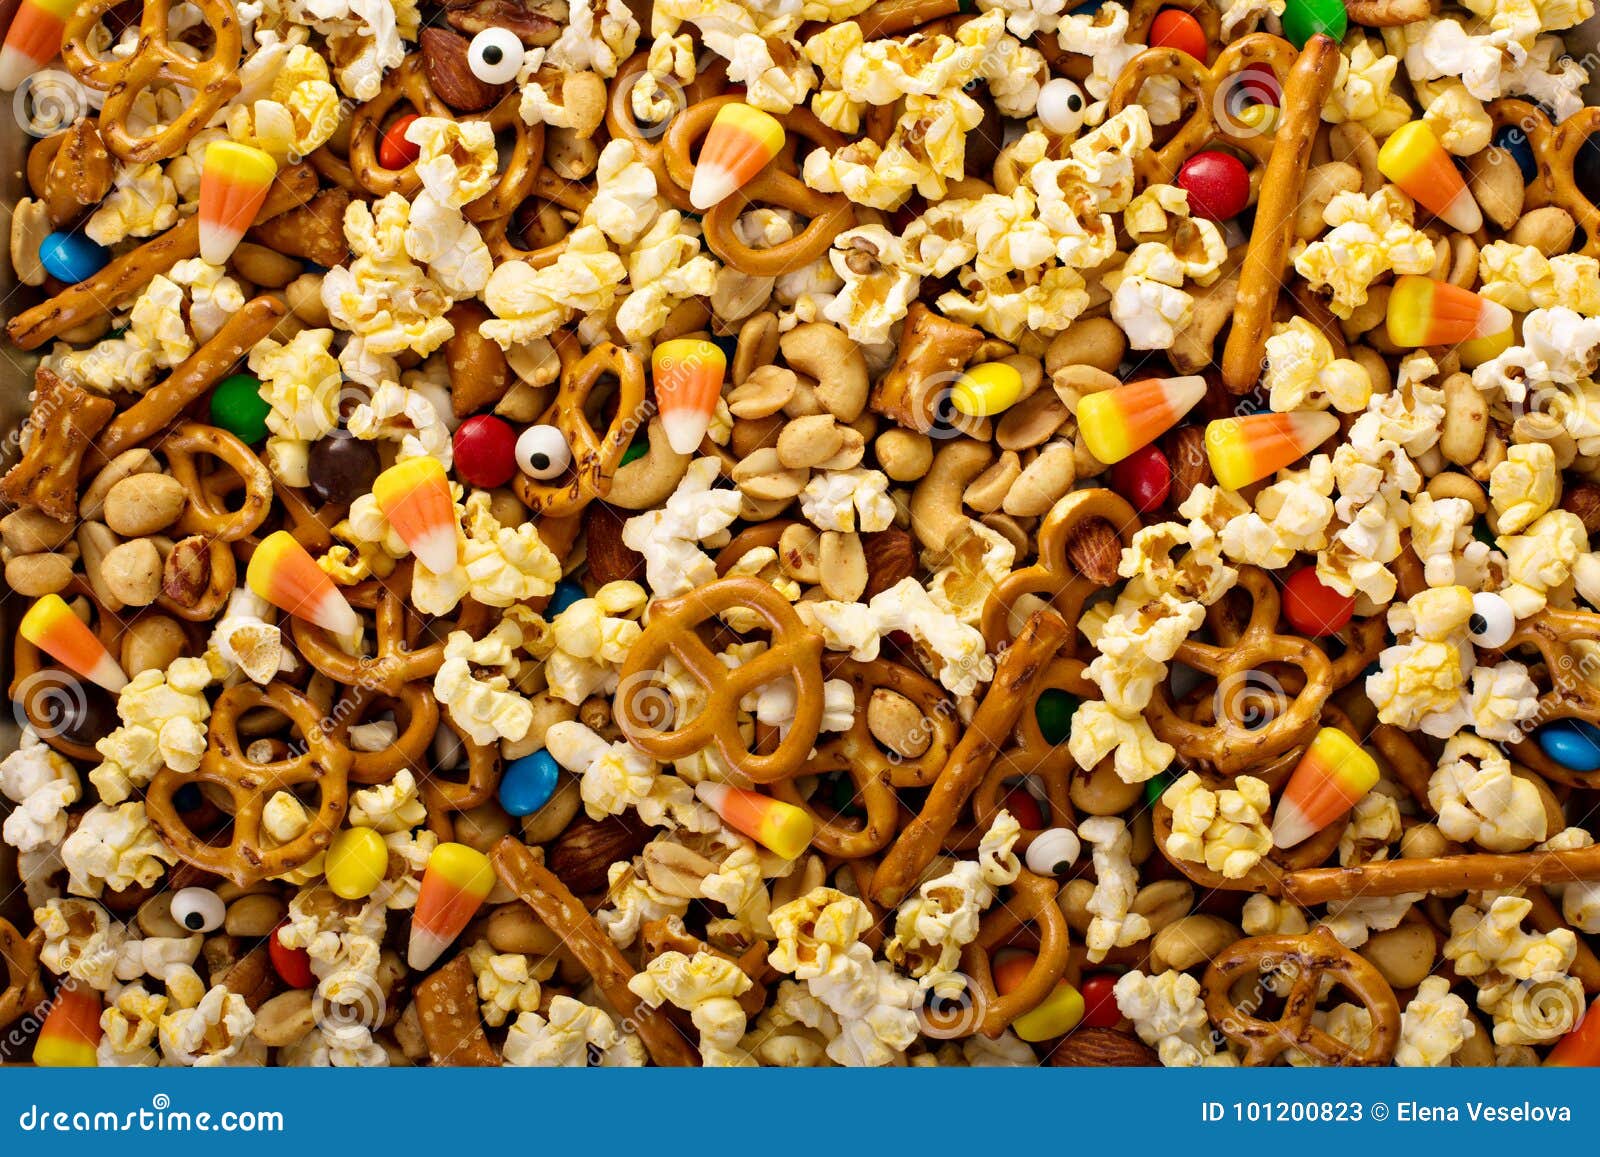 homemade halloween trail mix with popcorn, pretzels and nuts